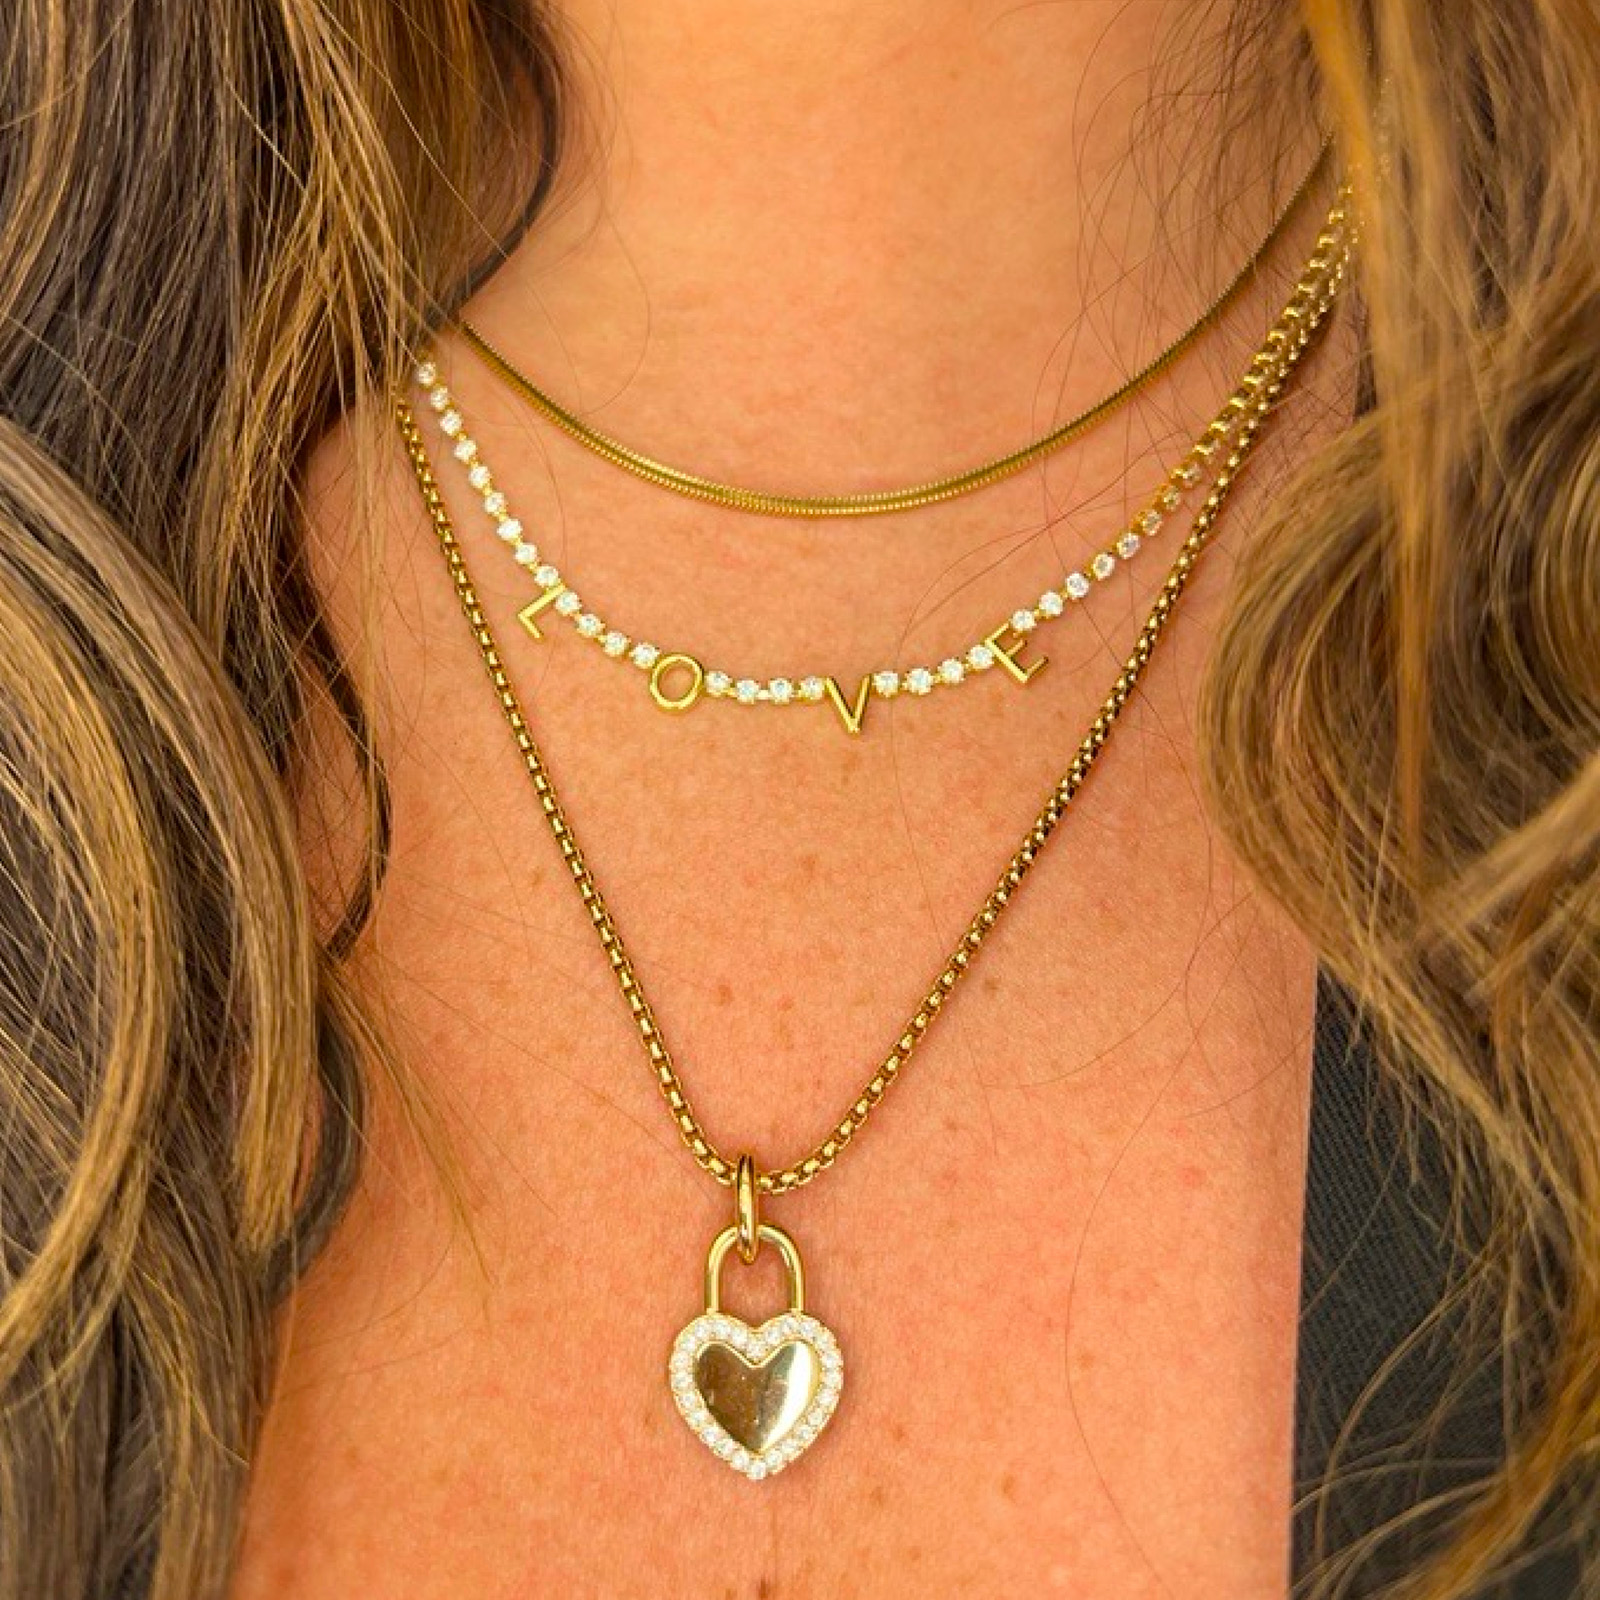 The Heart of Gold Set | Shop Now